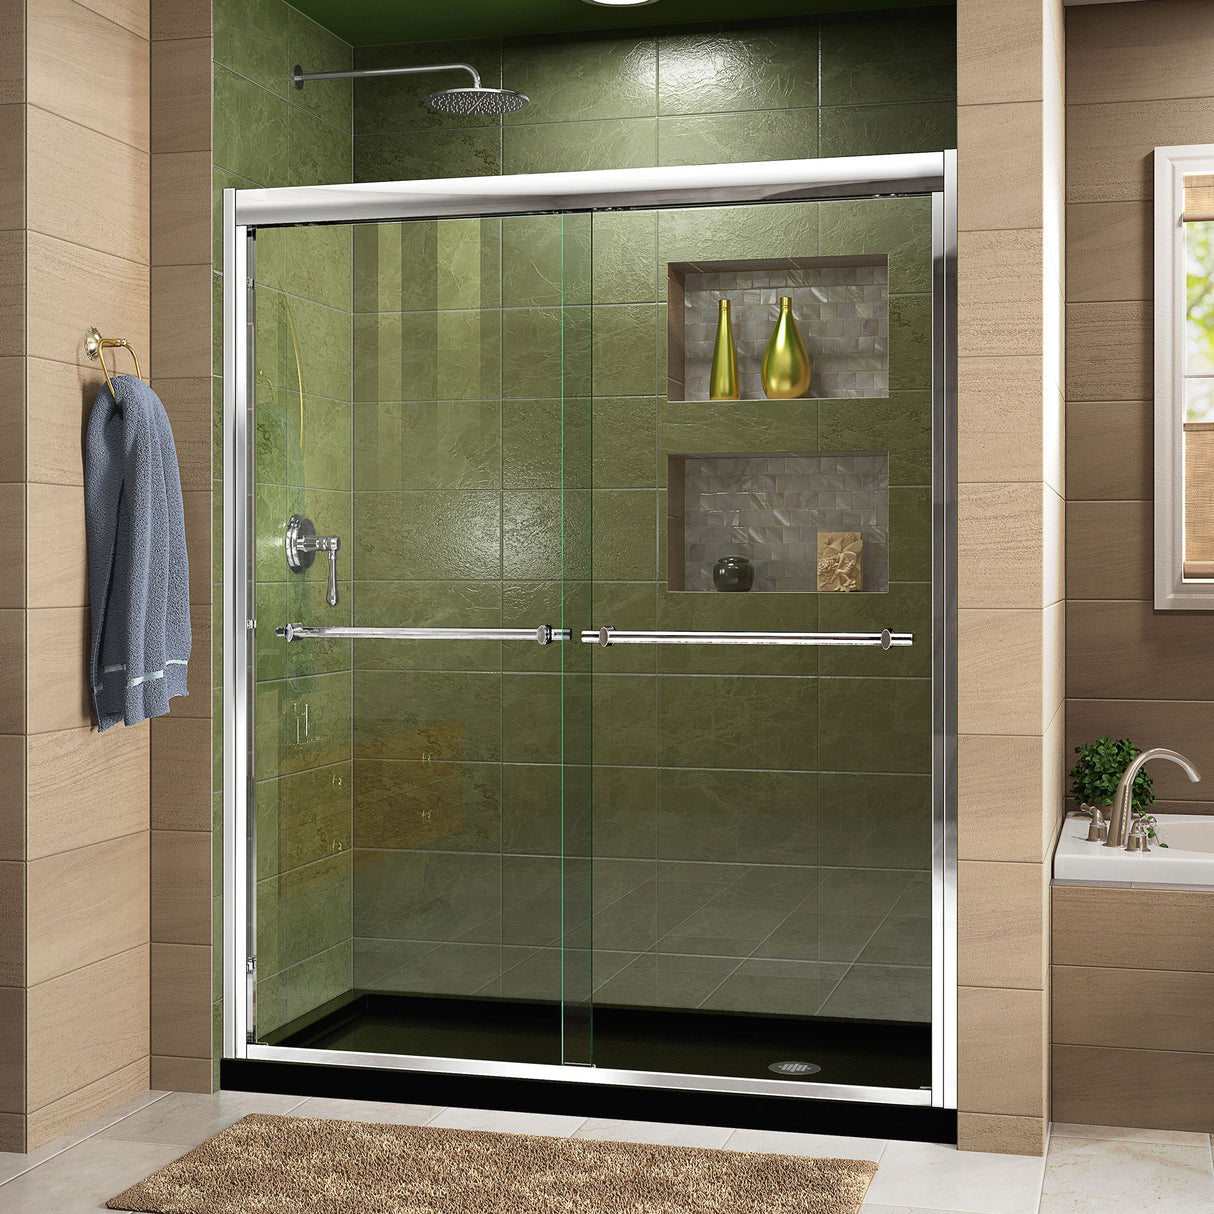 DreamLine Duet 36 in. D x 60 in. W x 74 3/4 in. H Semi-Frameless Bypass Shower Door in Chrome and Right Drain Black Base